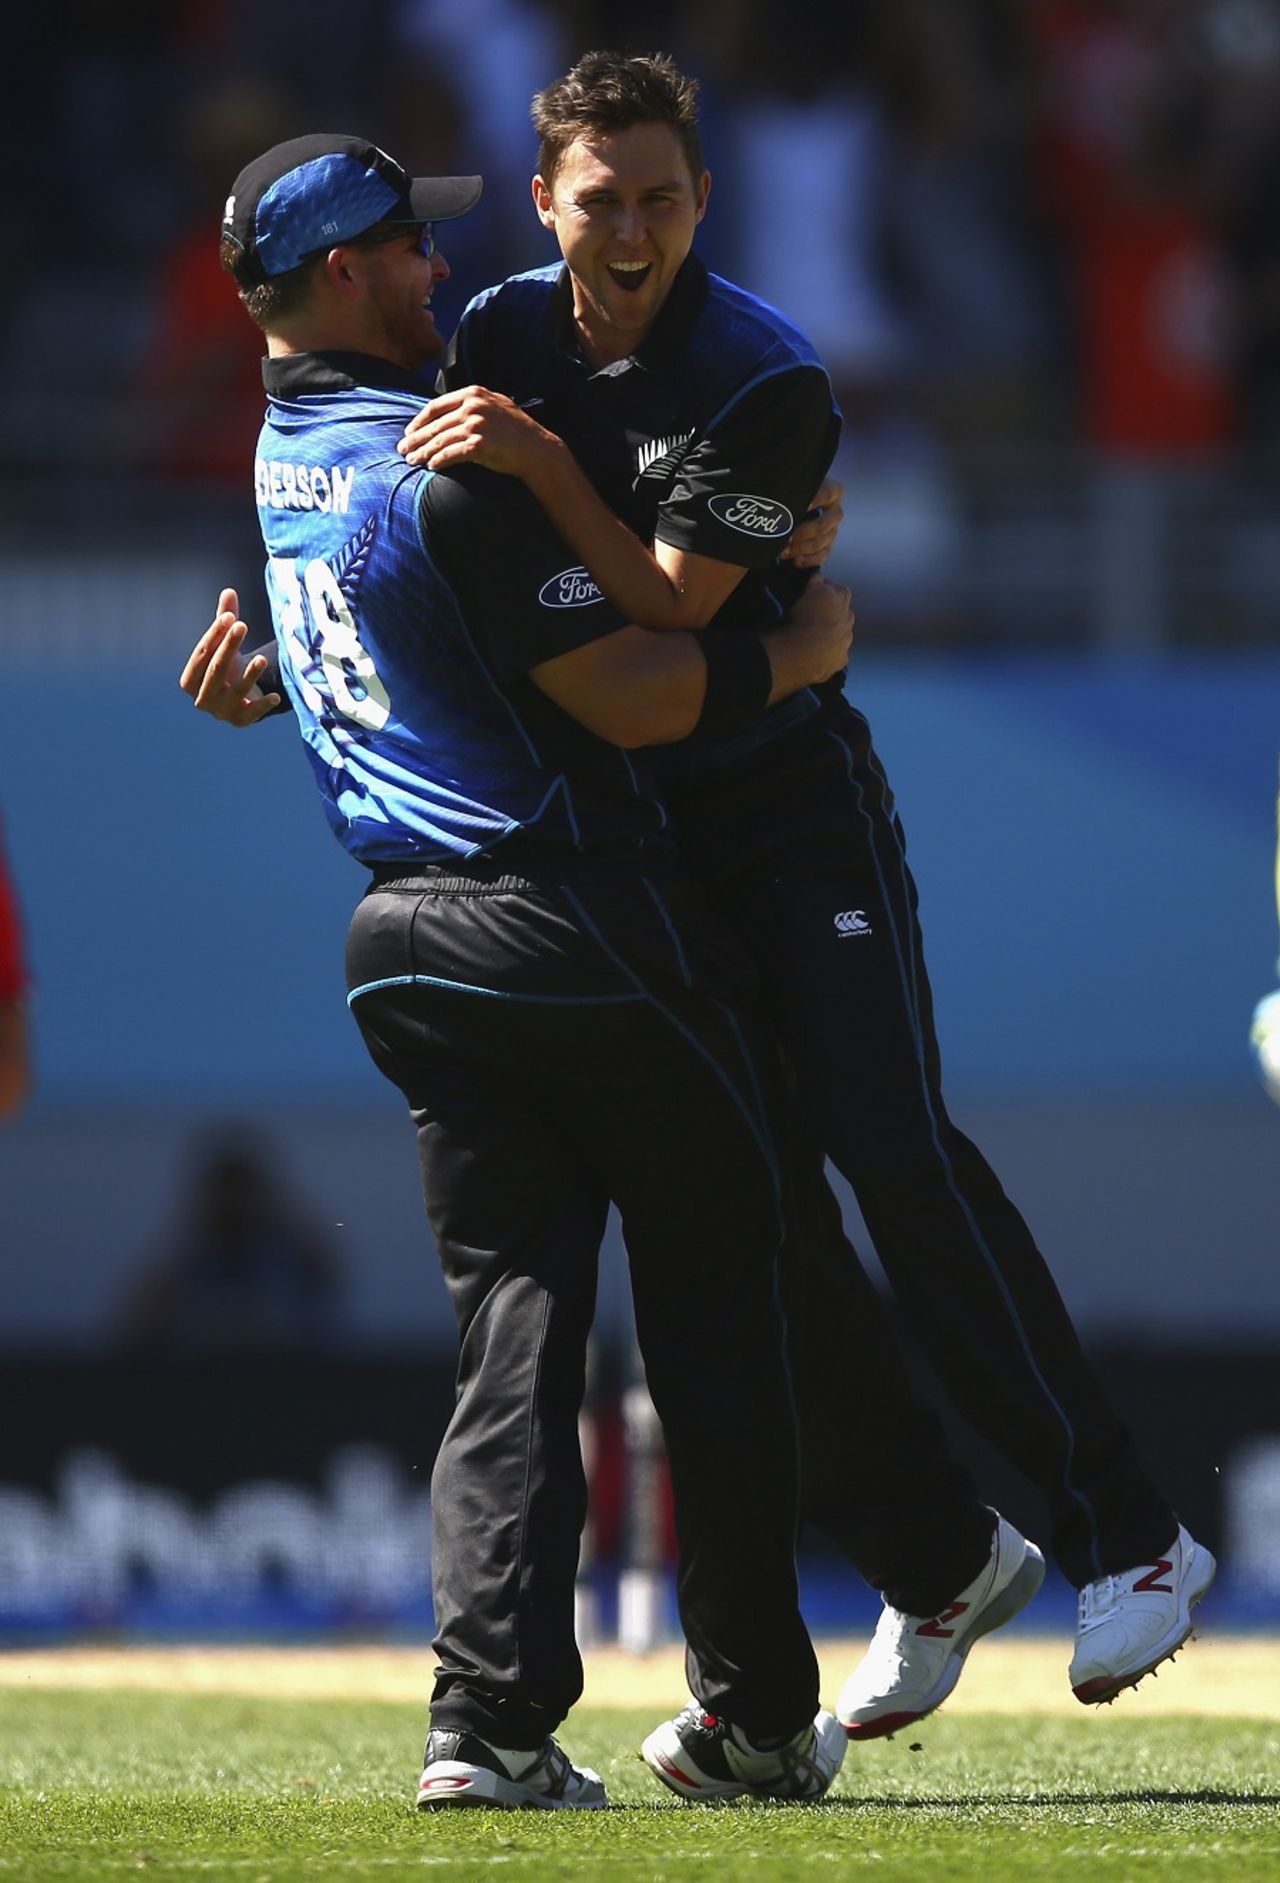 Trent Boult celebrates with Corey Anderson, New Zealand v Australia, World Cup 2015, Group A, Auckland, February 28, 2015